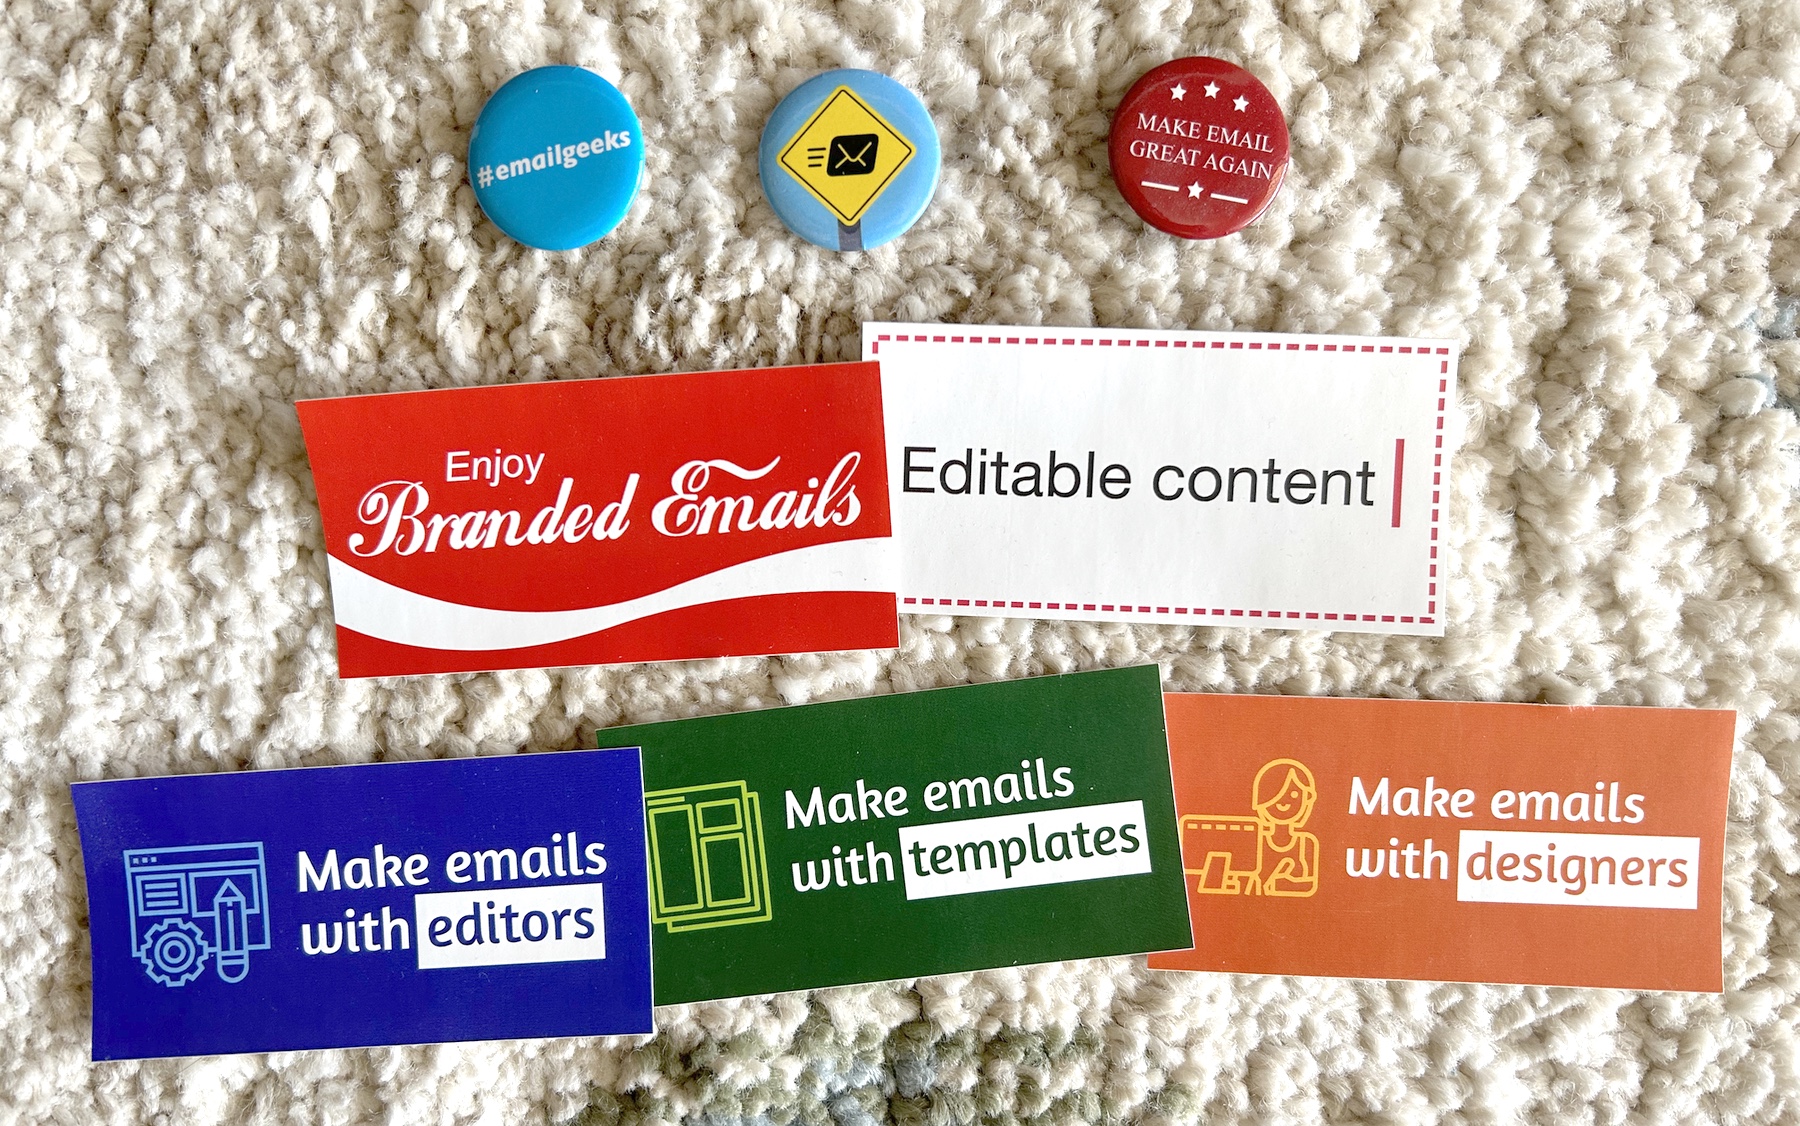 A photo of stickers and pins made for #emailgeeks that say: 'Enjoy Branded Emails', 'Editable content', Make email great again', '#emailgeeks', 'Make emails with editors', 'Make emails with templates', 'Make emails with designers'